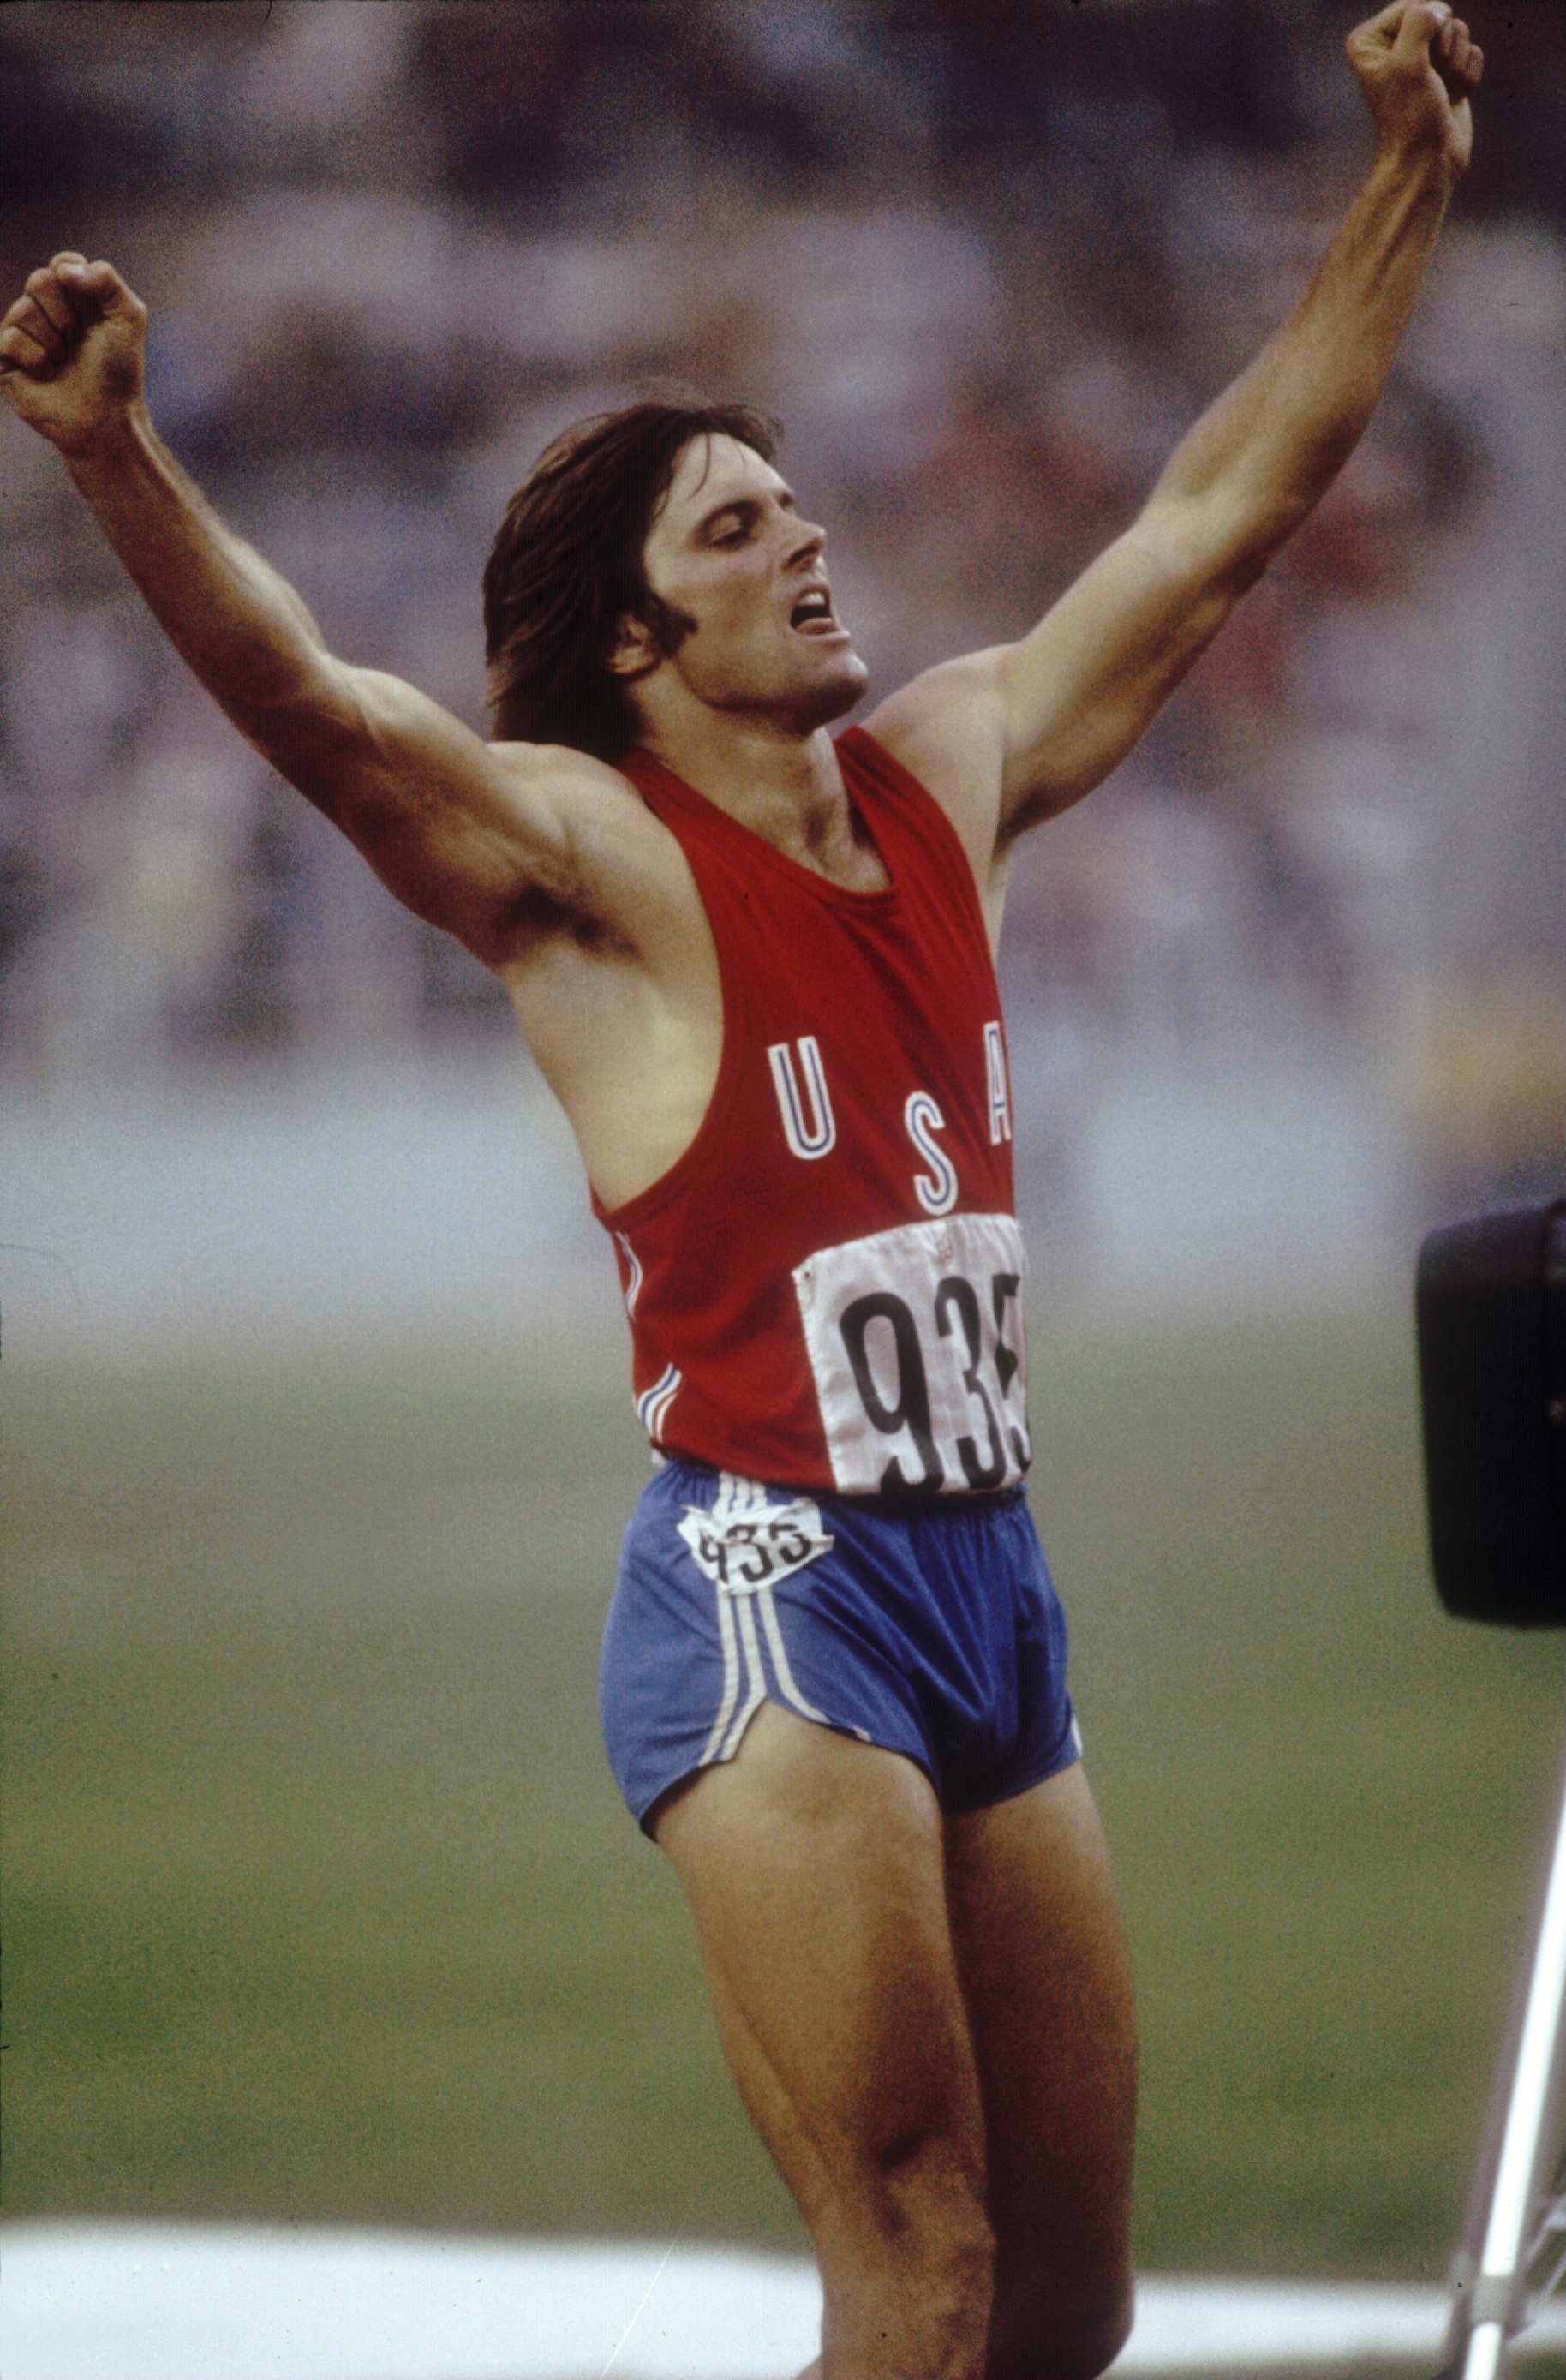 Bruce Jenner of the USA celebrates during his record setting performance in the decathlon in the 1976, Summer Olympics in Montreal, Canada. | Source: Getty Images.